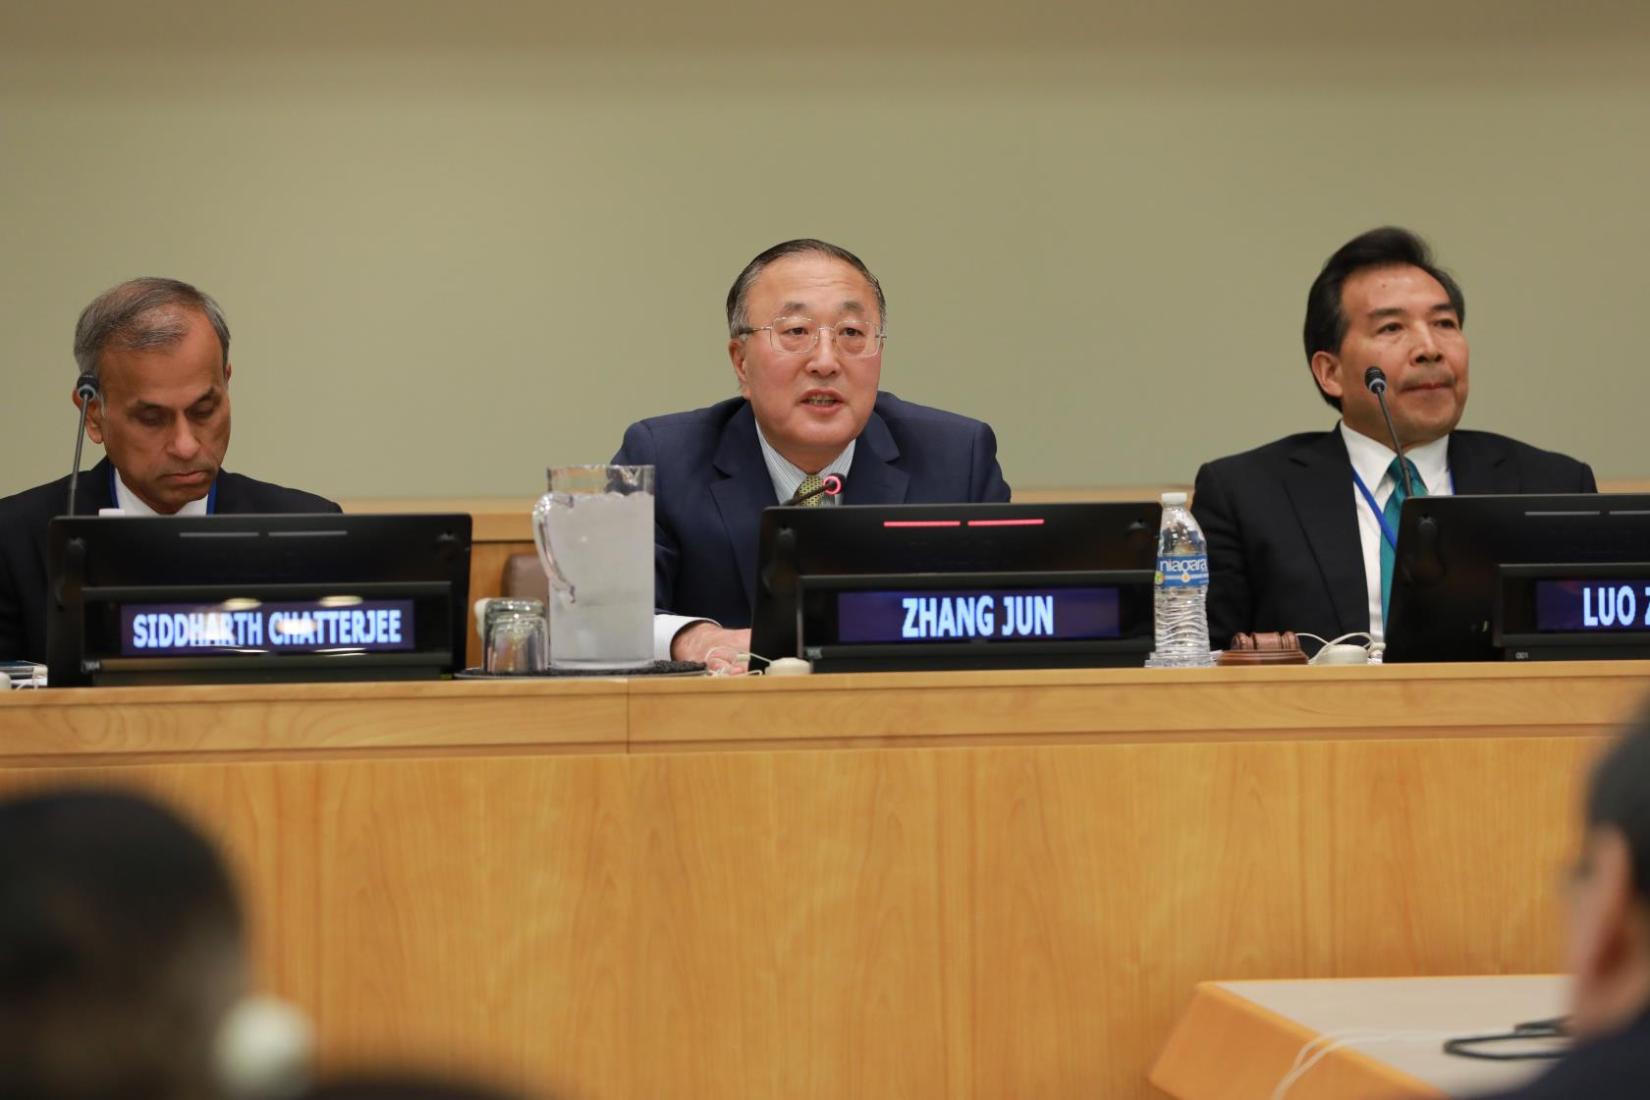 Zhang Jun (centre), Permanent Representative of the People’s Republic of China to the UN